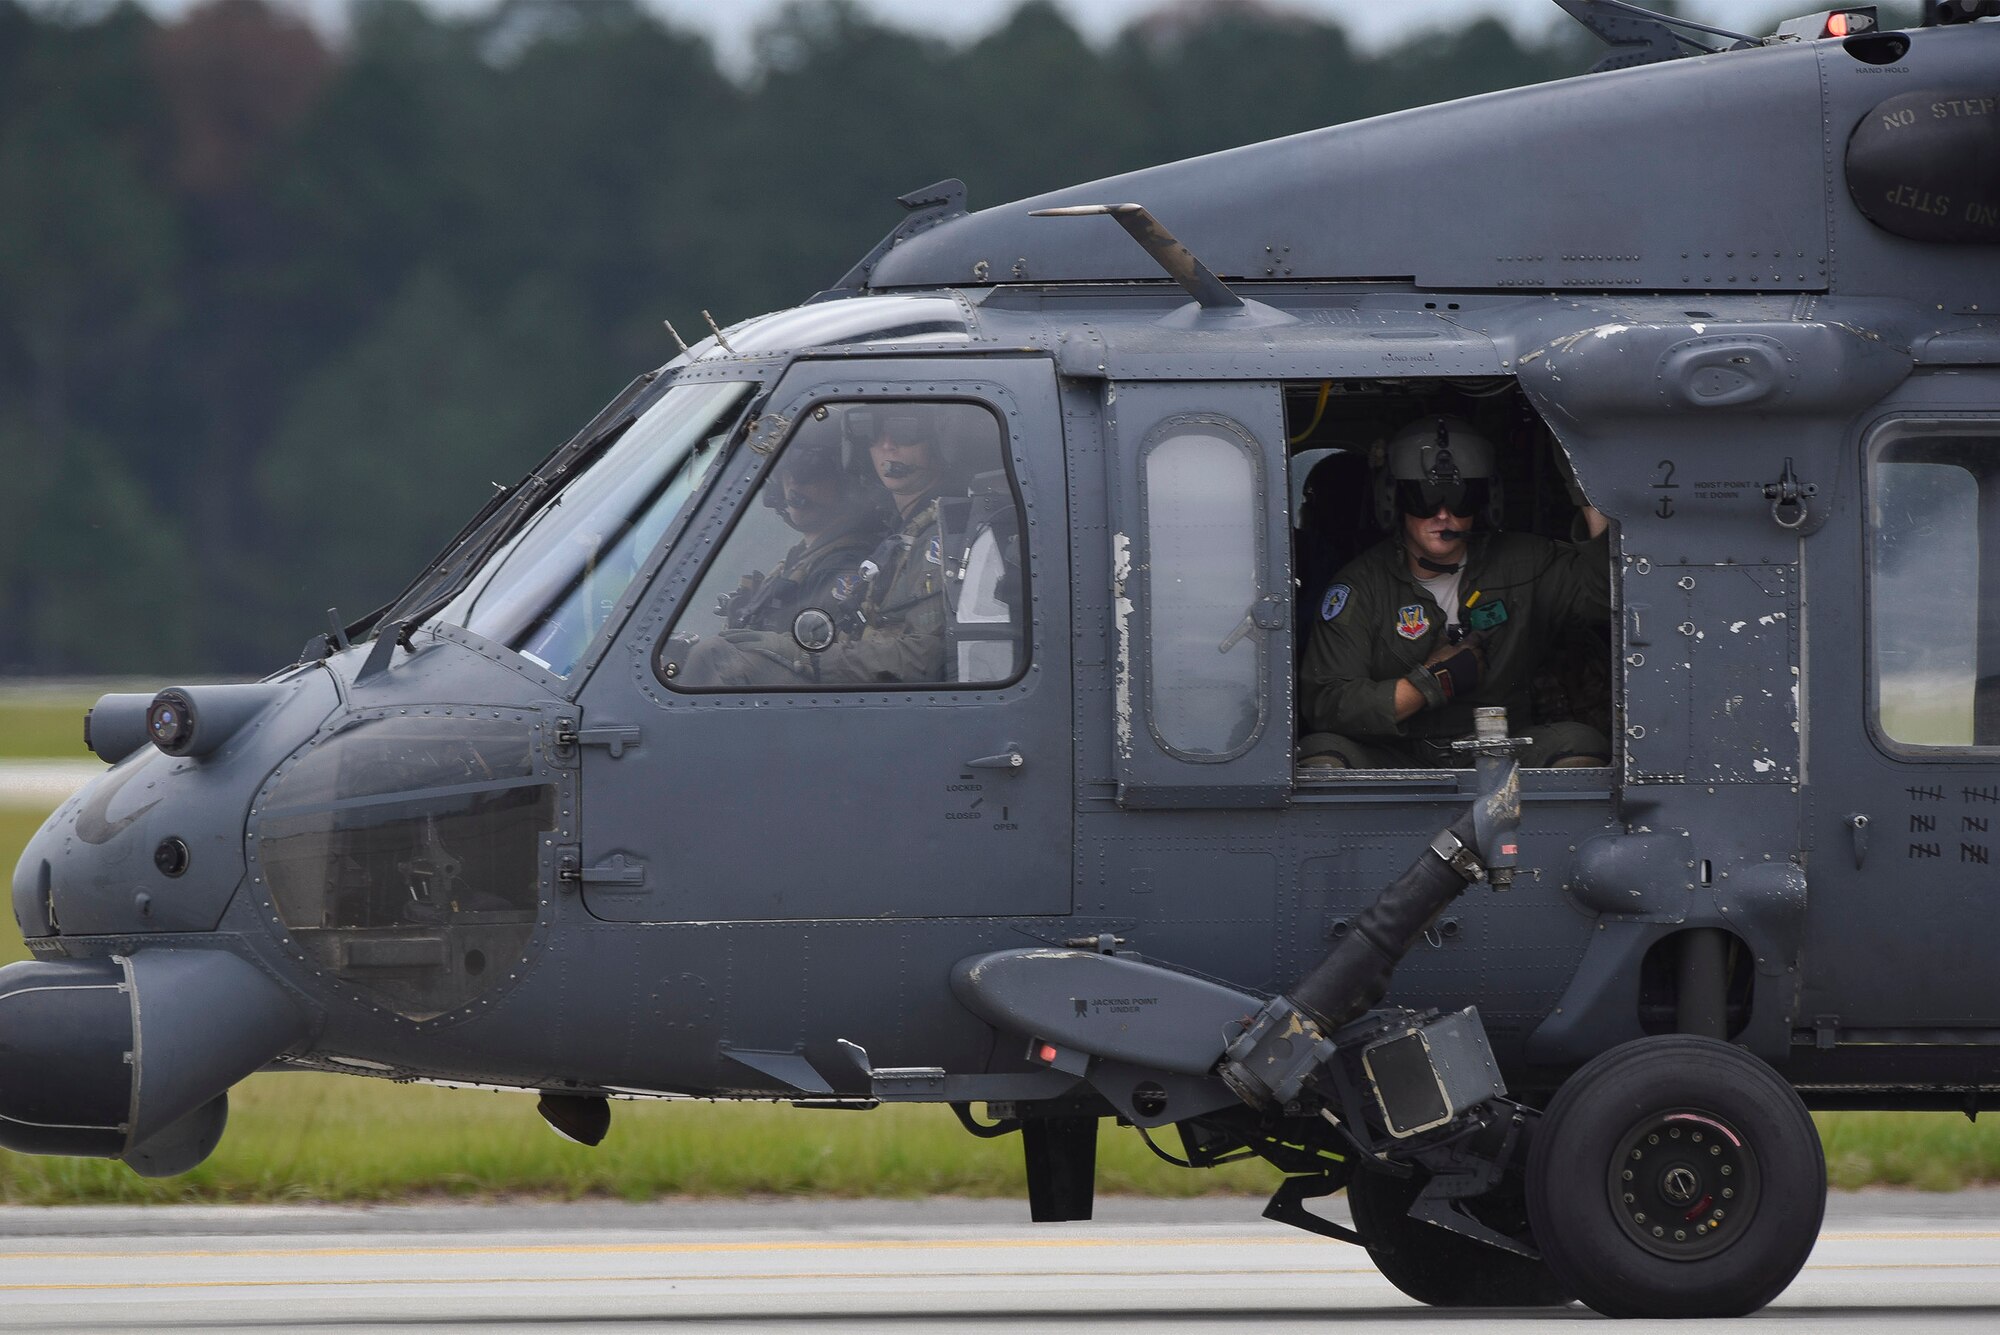 Members of the 41st Rescue Squadron prepare to takeoff in an HH-60G Pavehawk in support of Hurricane Irma, Sept. 9, 2017, at Moody Air Force Base, Ga. Team Moody aircraft and rescue assets travelled to Columbus Air Force Base, Miss., for shelter before re-engaging with other Moody assets to assist the Federal Emergency Management Agency and other first responder agencies during upcoming Hurricane Irma in the Southeast region. (U.S. Air Force photo by Senior Airman Greg Nash)